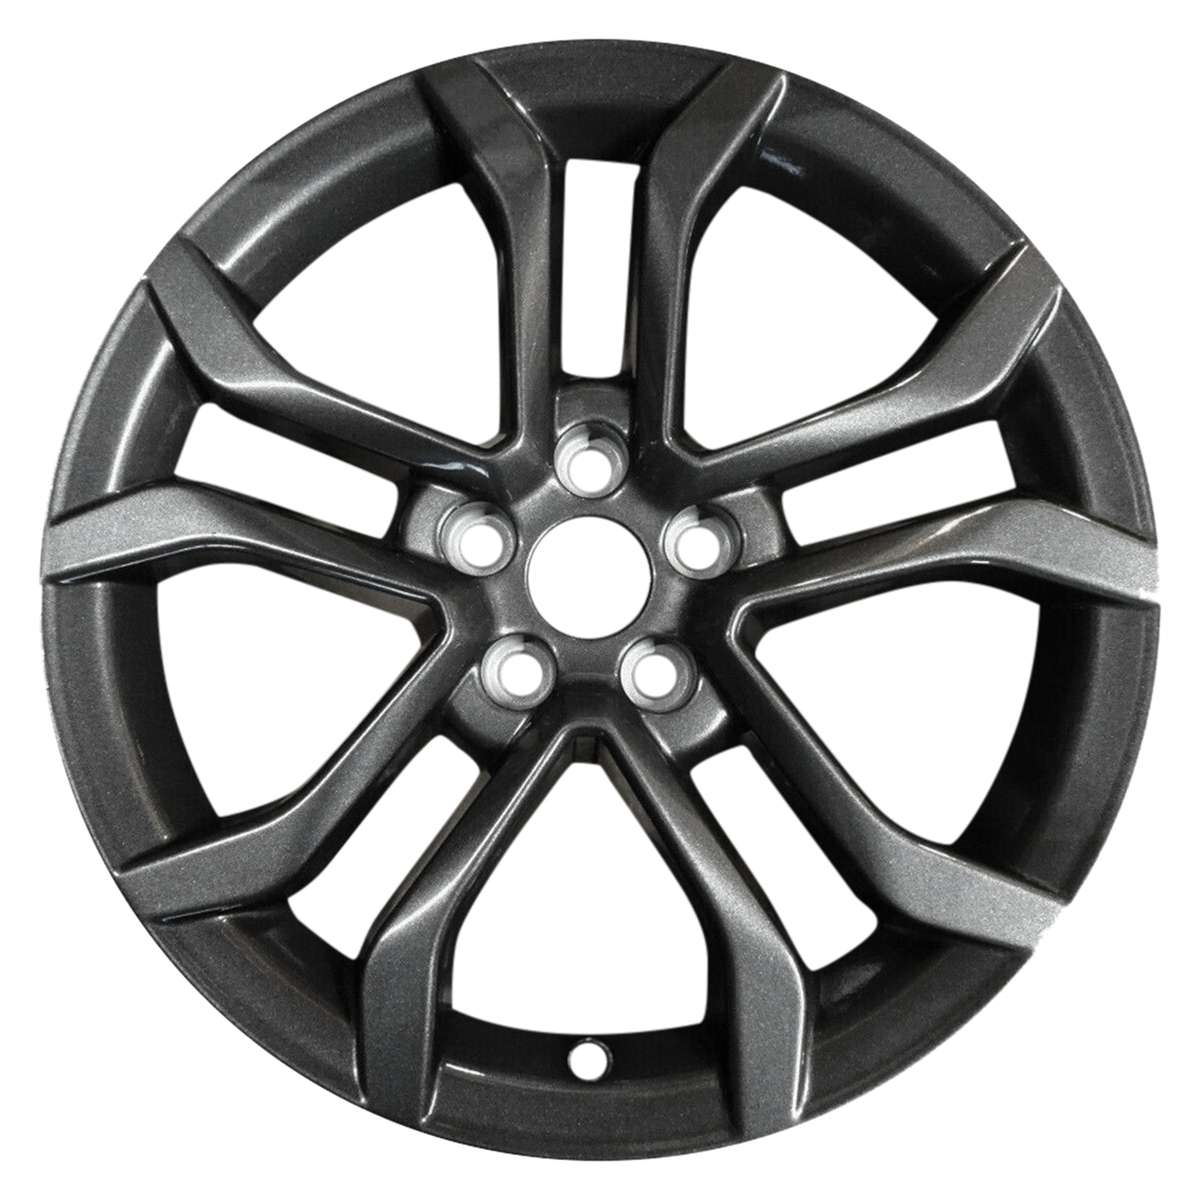 2019 Ford Fusion New 18" Replacement Wheel Rim RW10120C